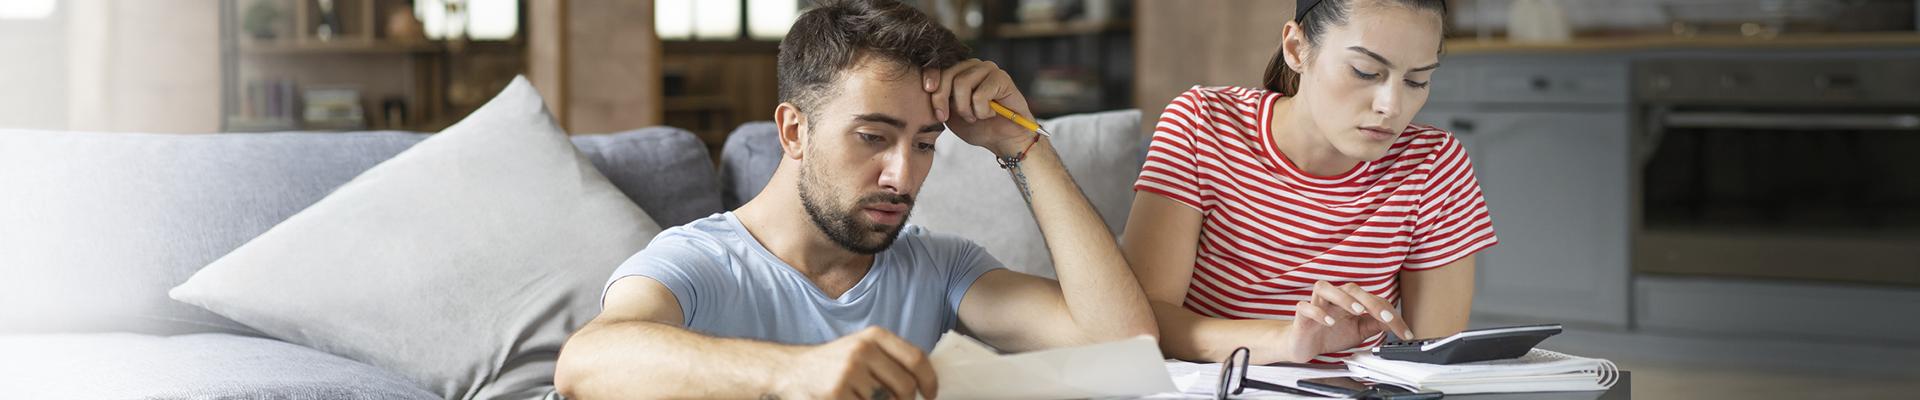 Man and woman in lounge looking concerned at papers